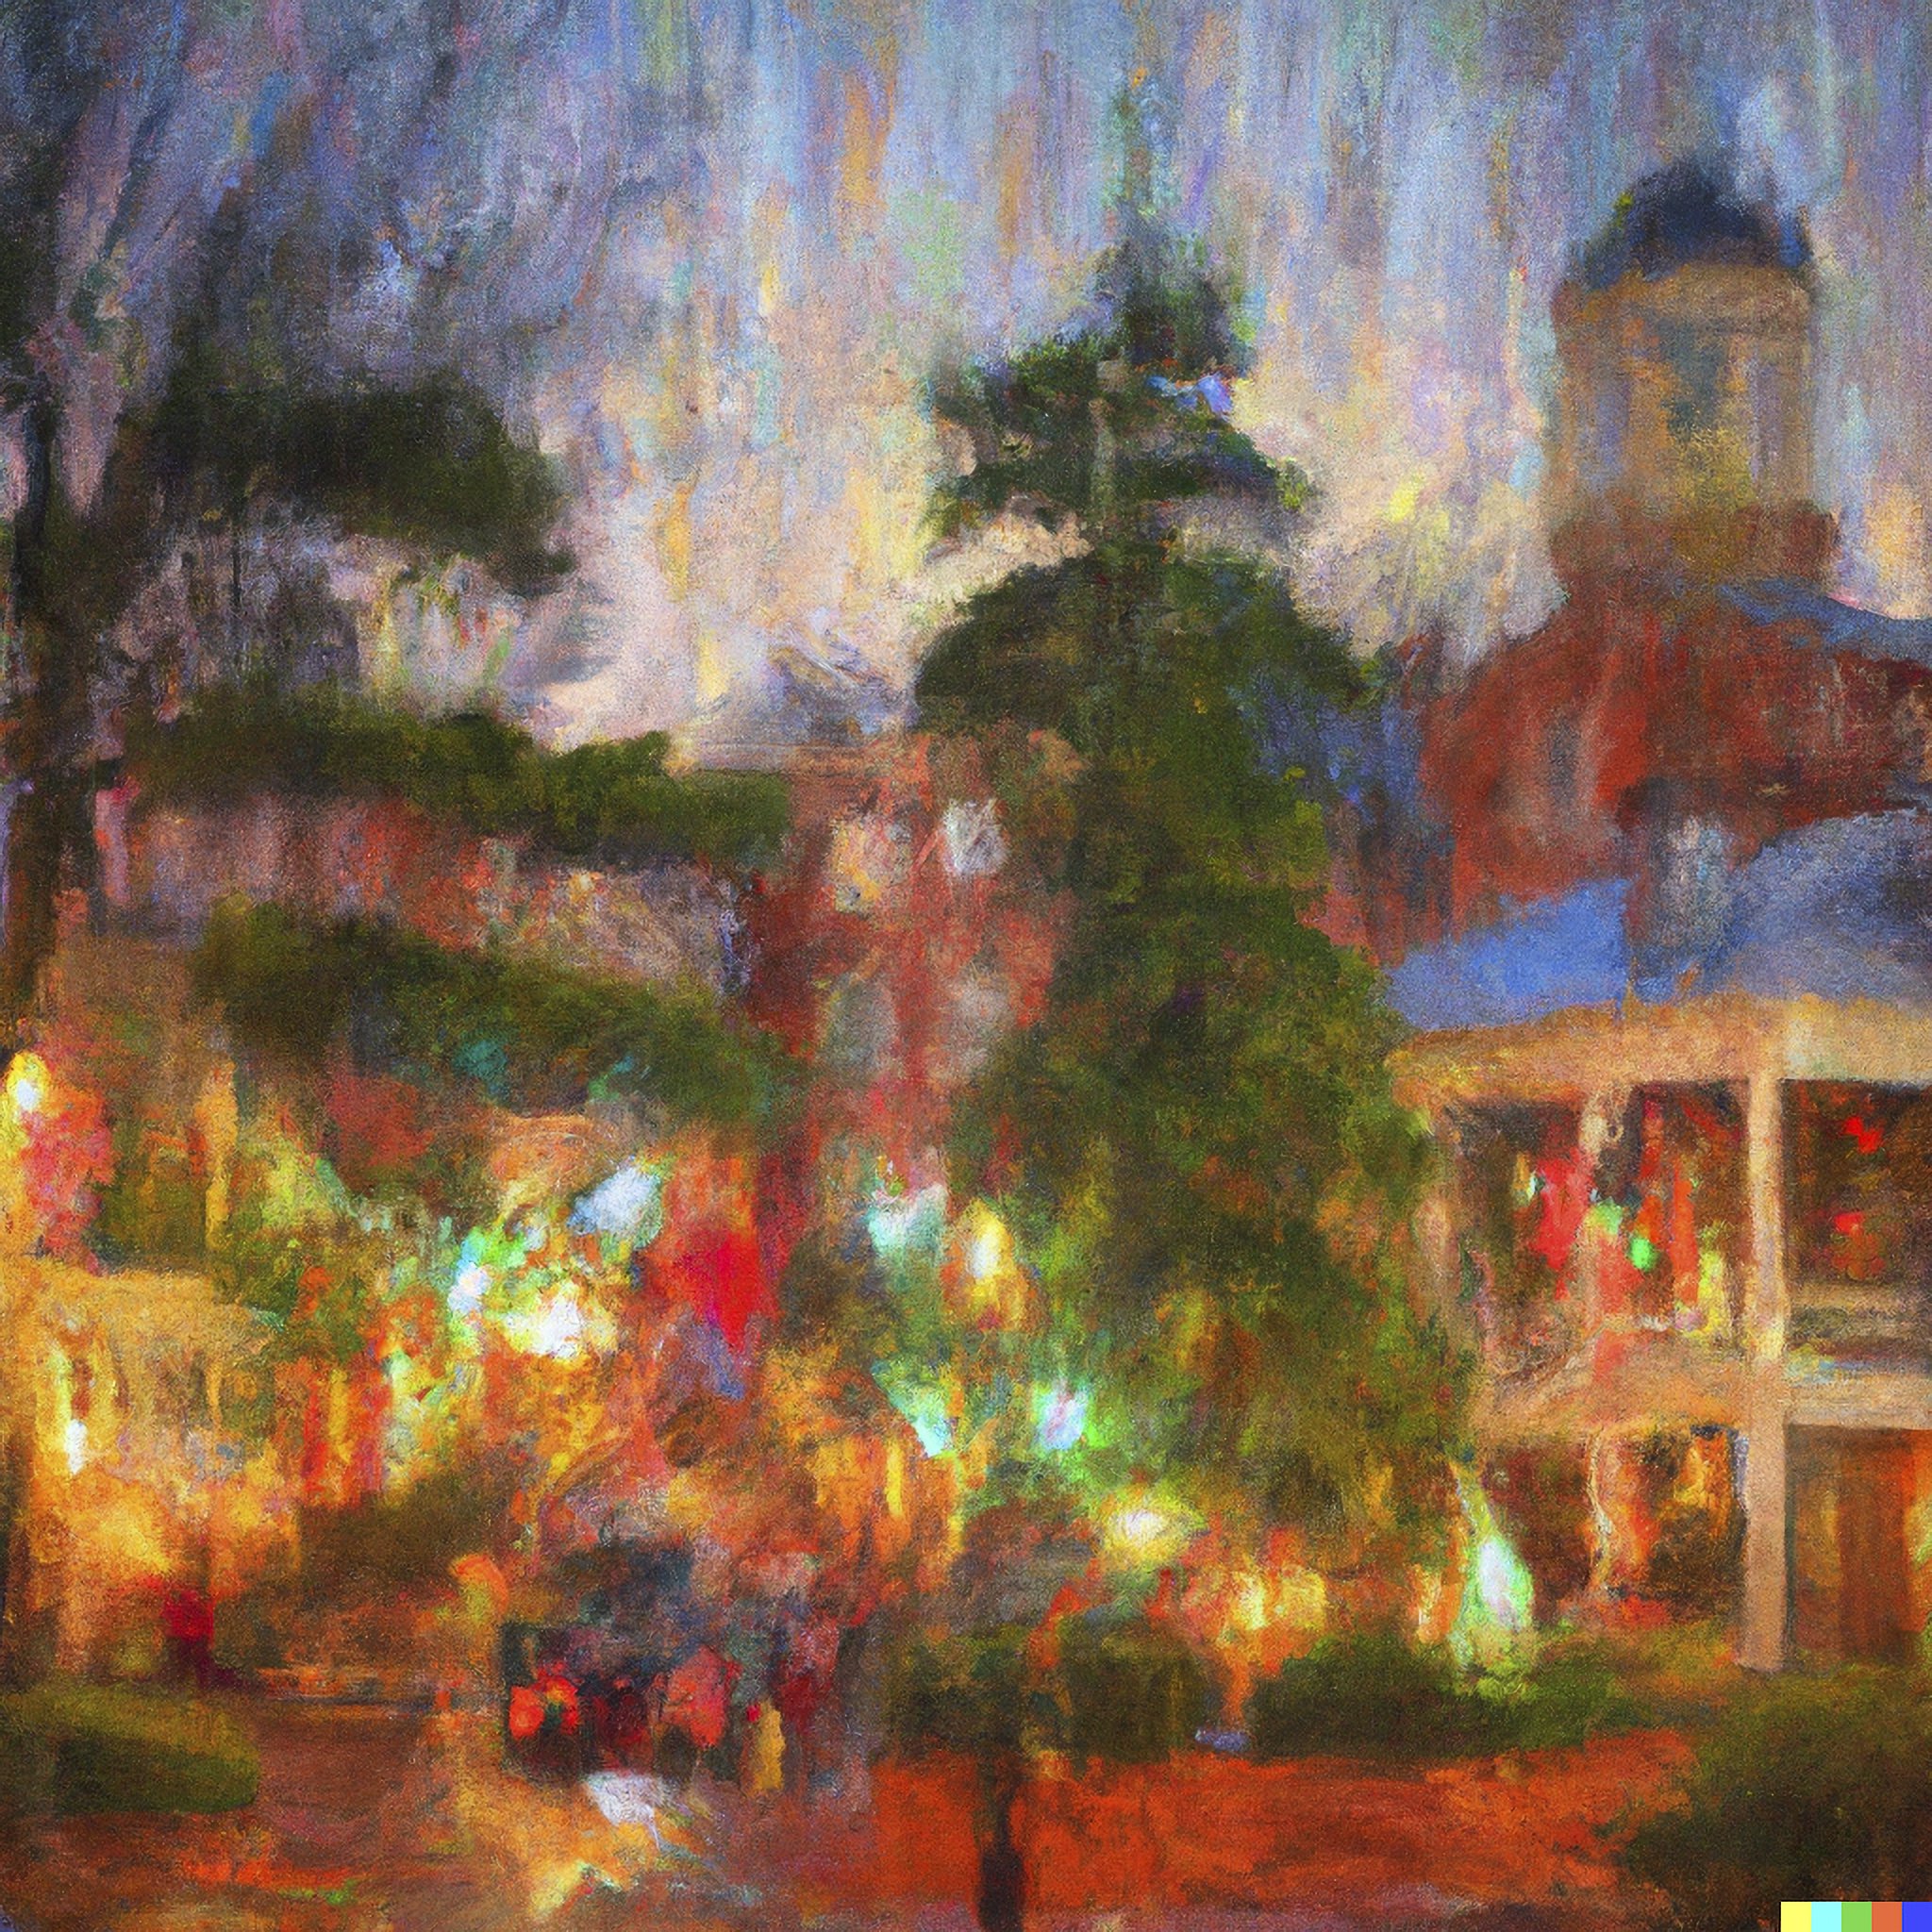 20221224-DALL·E 2022-12-24 11.34.11 - An impressionist oil painting of Athens Georgia at Christmas-Enhanced.jpg